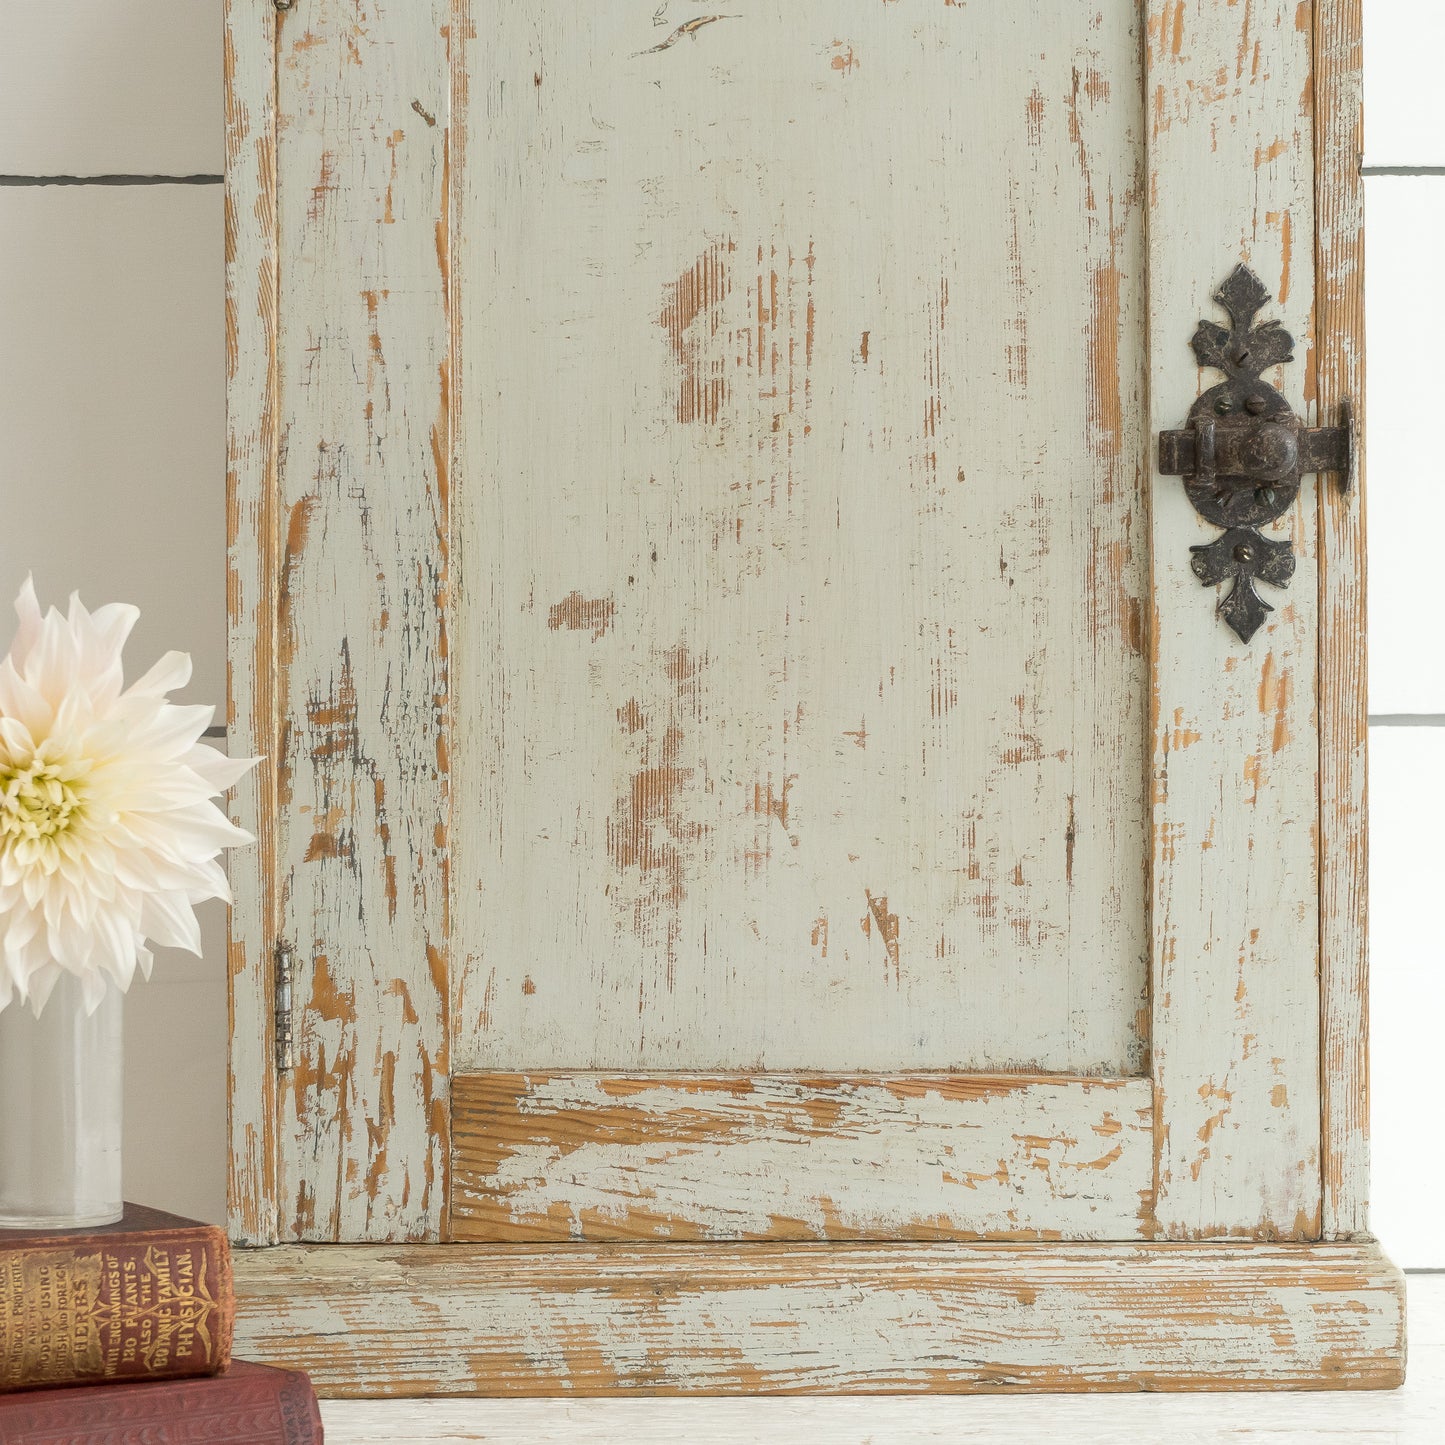 DECORATIVE PALE GREEN PAINTED CABINET